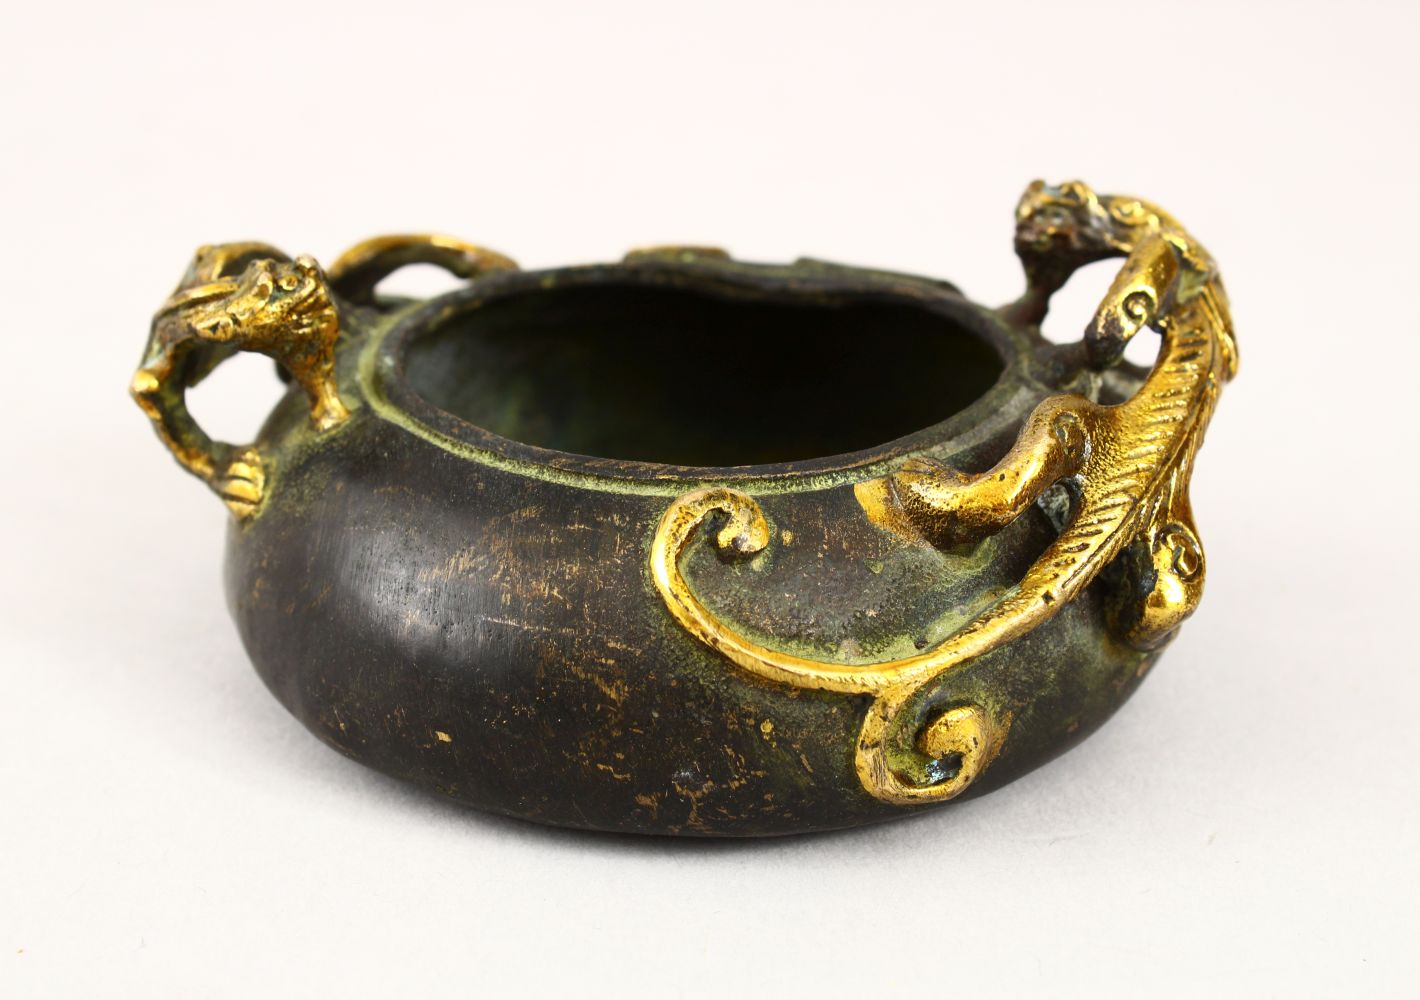 A 20TH CENTURY CHINESE BRONZE TWIN HANDLE CENSER, the censer with moulded gilded handles in the form